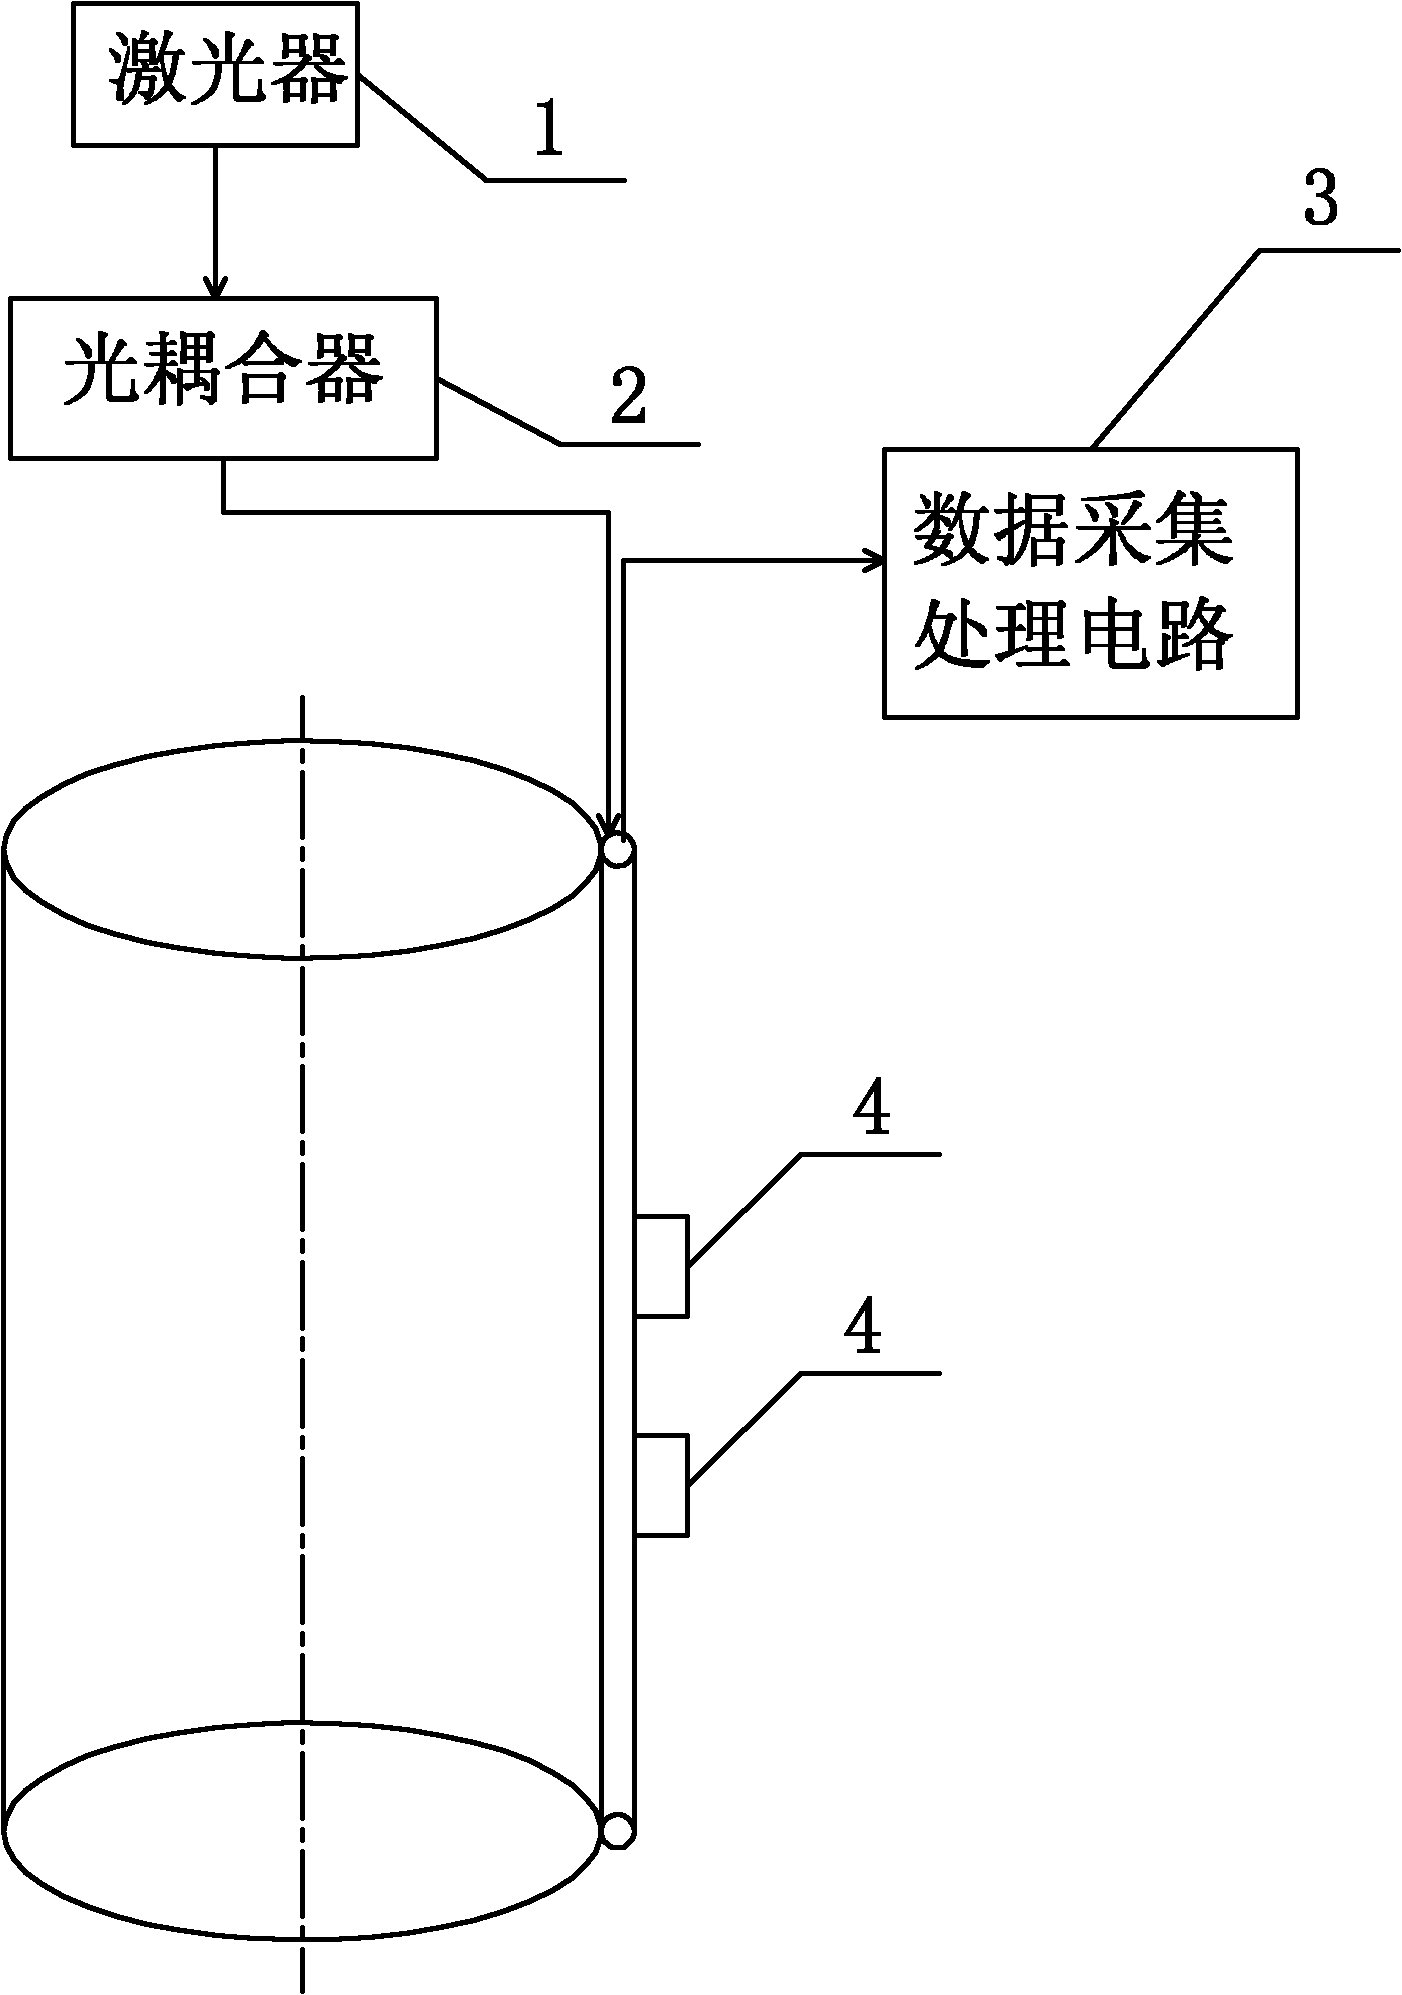 Corrugated diaphragm type pipe external pressure sensor, oil-water well casing external pressure monitoring device and method